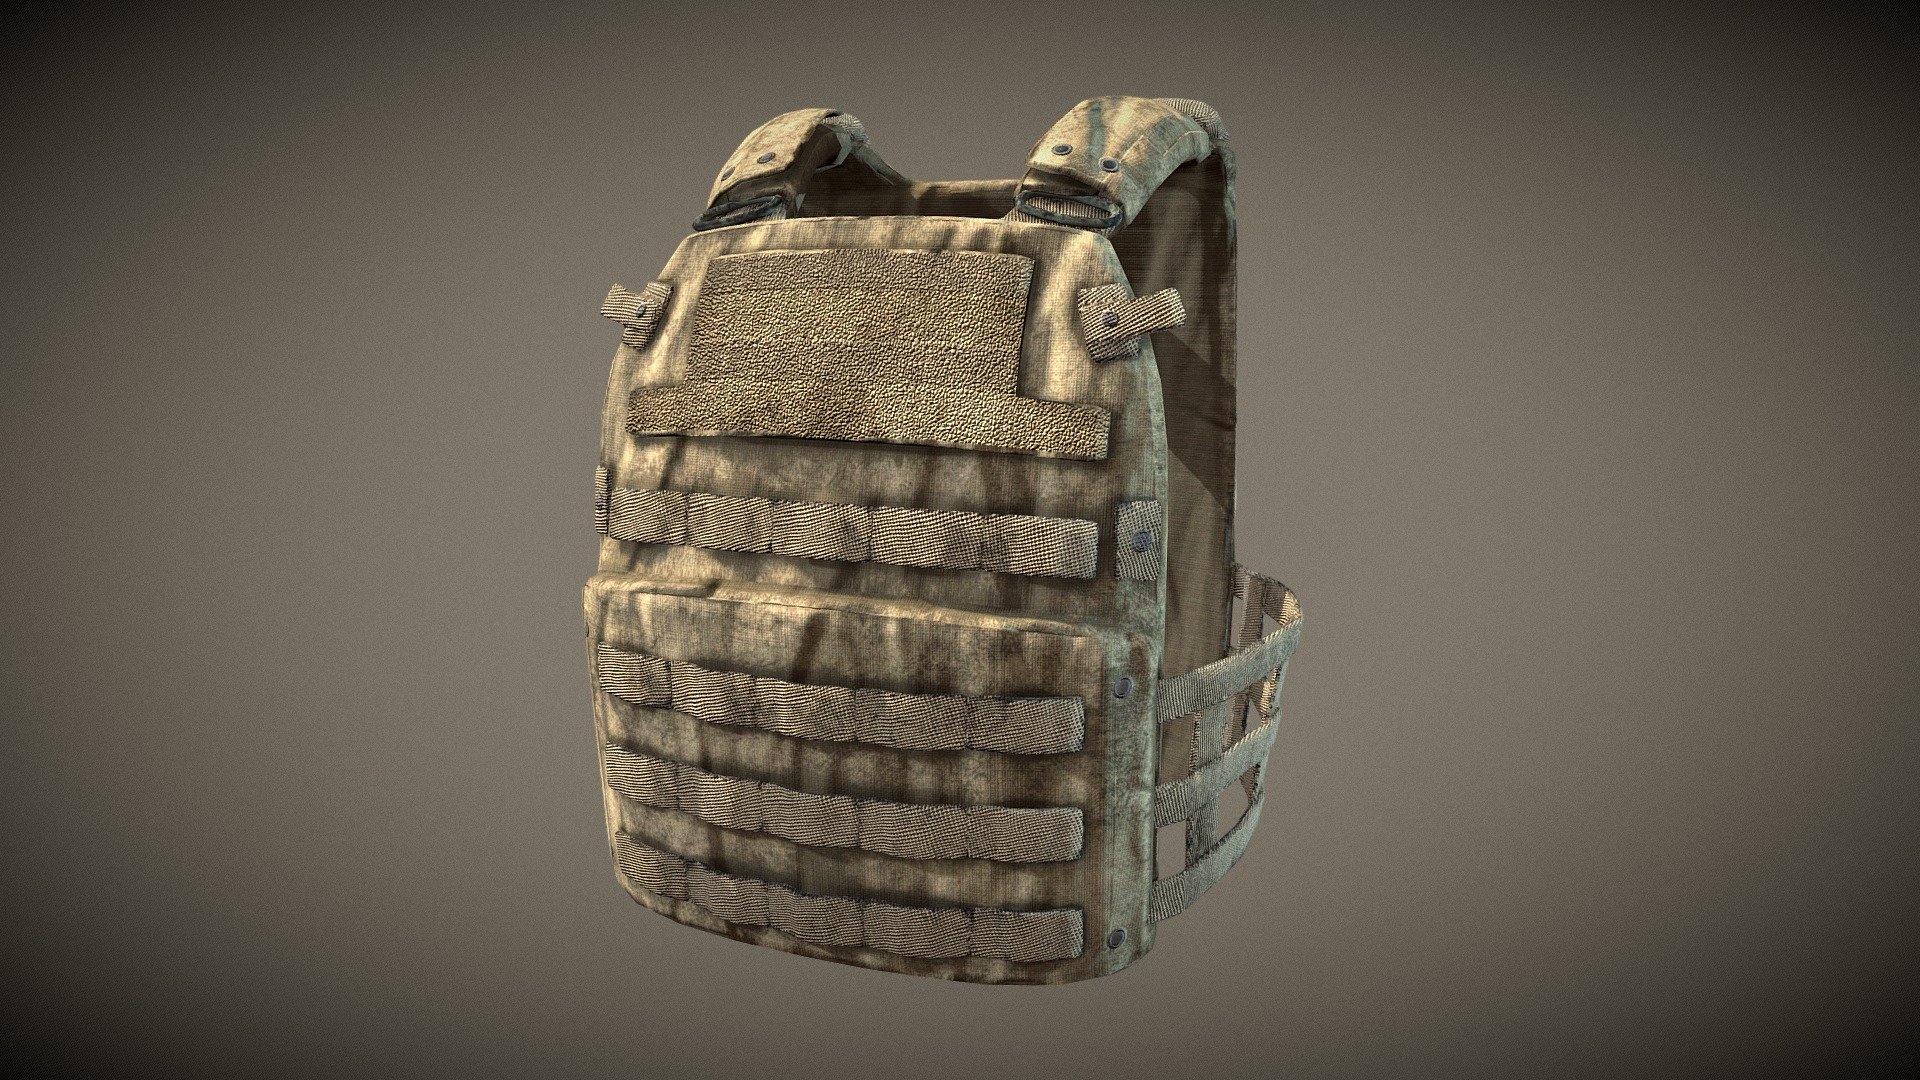 WTC M7 Military Vest Body Armor - Model/Art by Outworld Studios

Must give credit to Outworld Studios if using the asset.

Show support by joining my discord: https://discord.gg/EgWSkp8Cxn - WTC M7 Military Vest Body Armor - Buy Royalty Free 3D model by Outworld Studios (@outworldstudios) 3d model